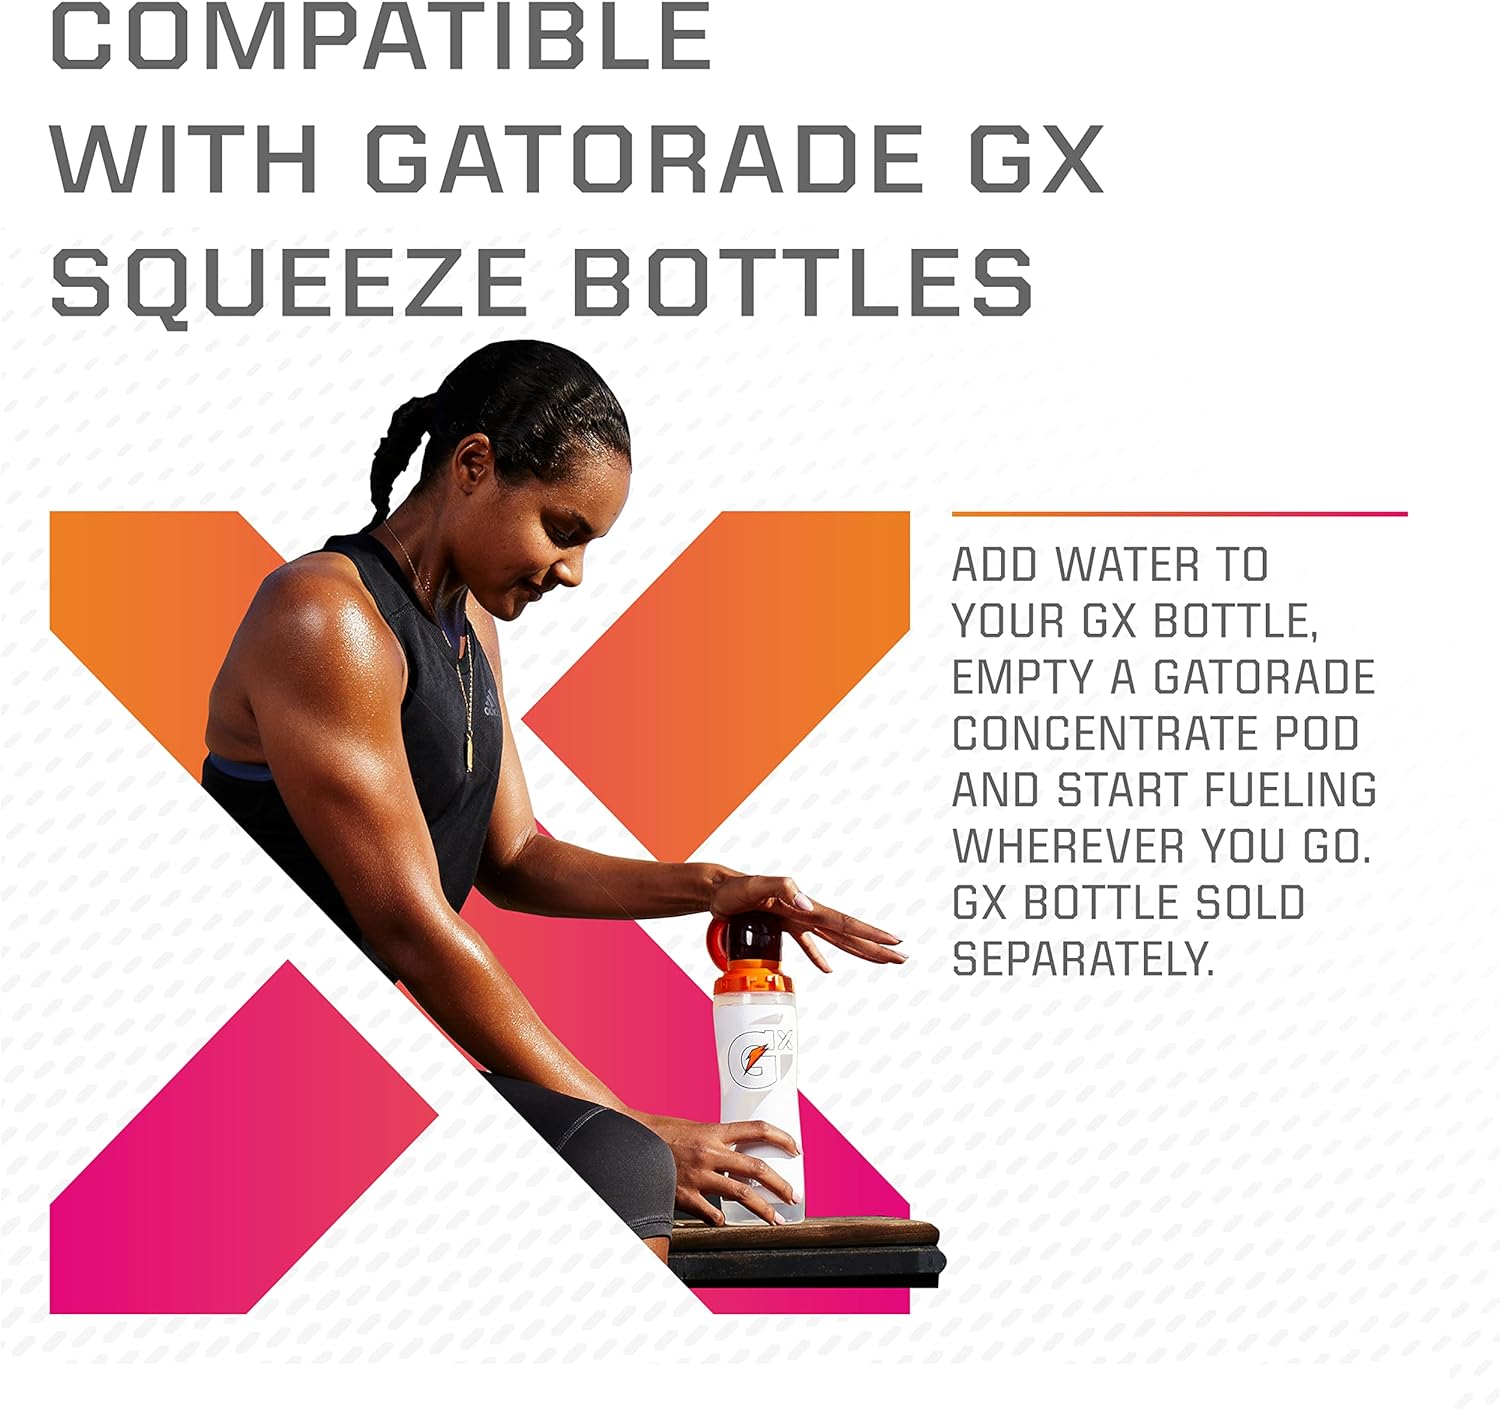 Gatorade Gx Hydration System, Non-Slip Gx Squeeze Bottles & Gx Sports Drink Concentrate Pods, 16 count : Grocery & Gourmet Food